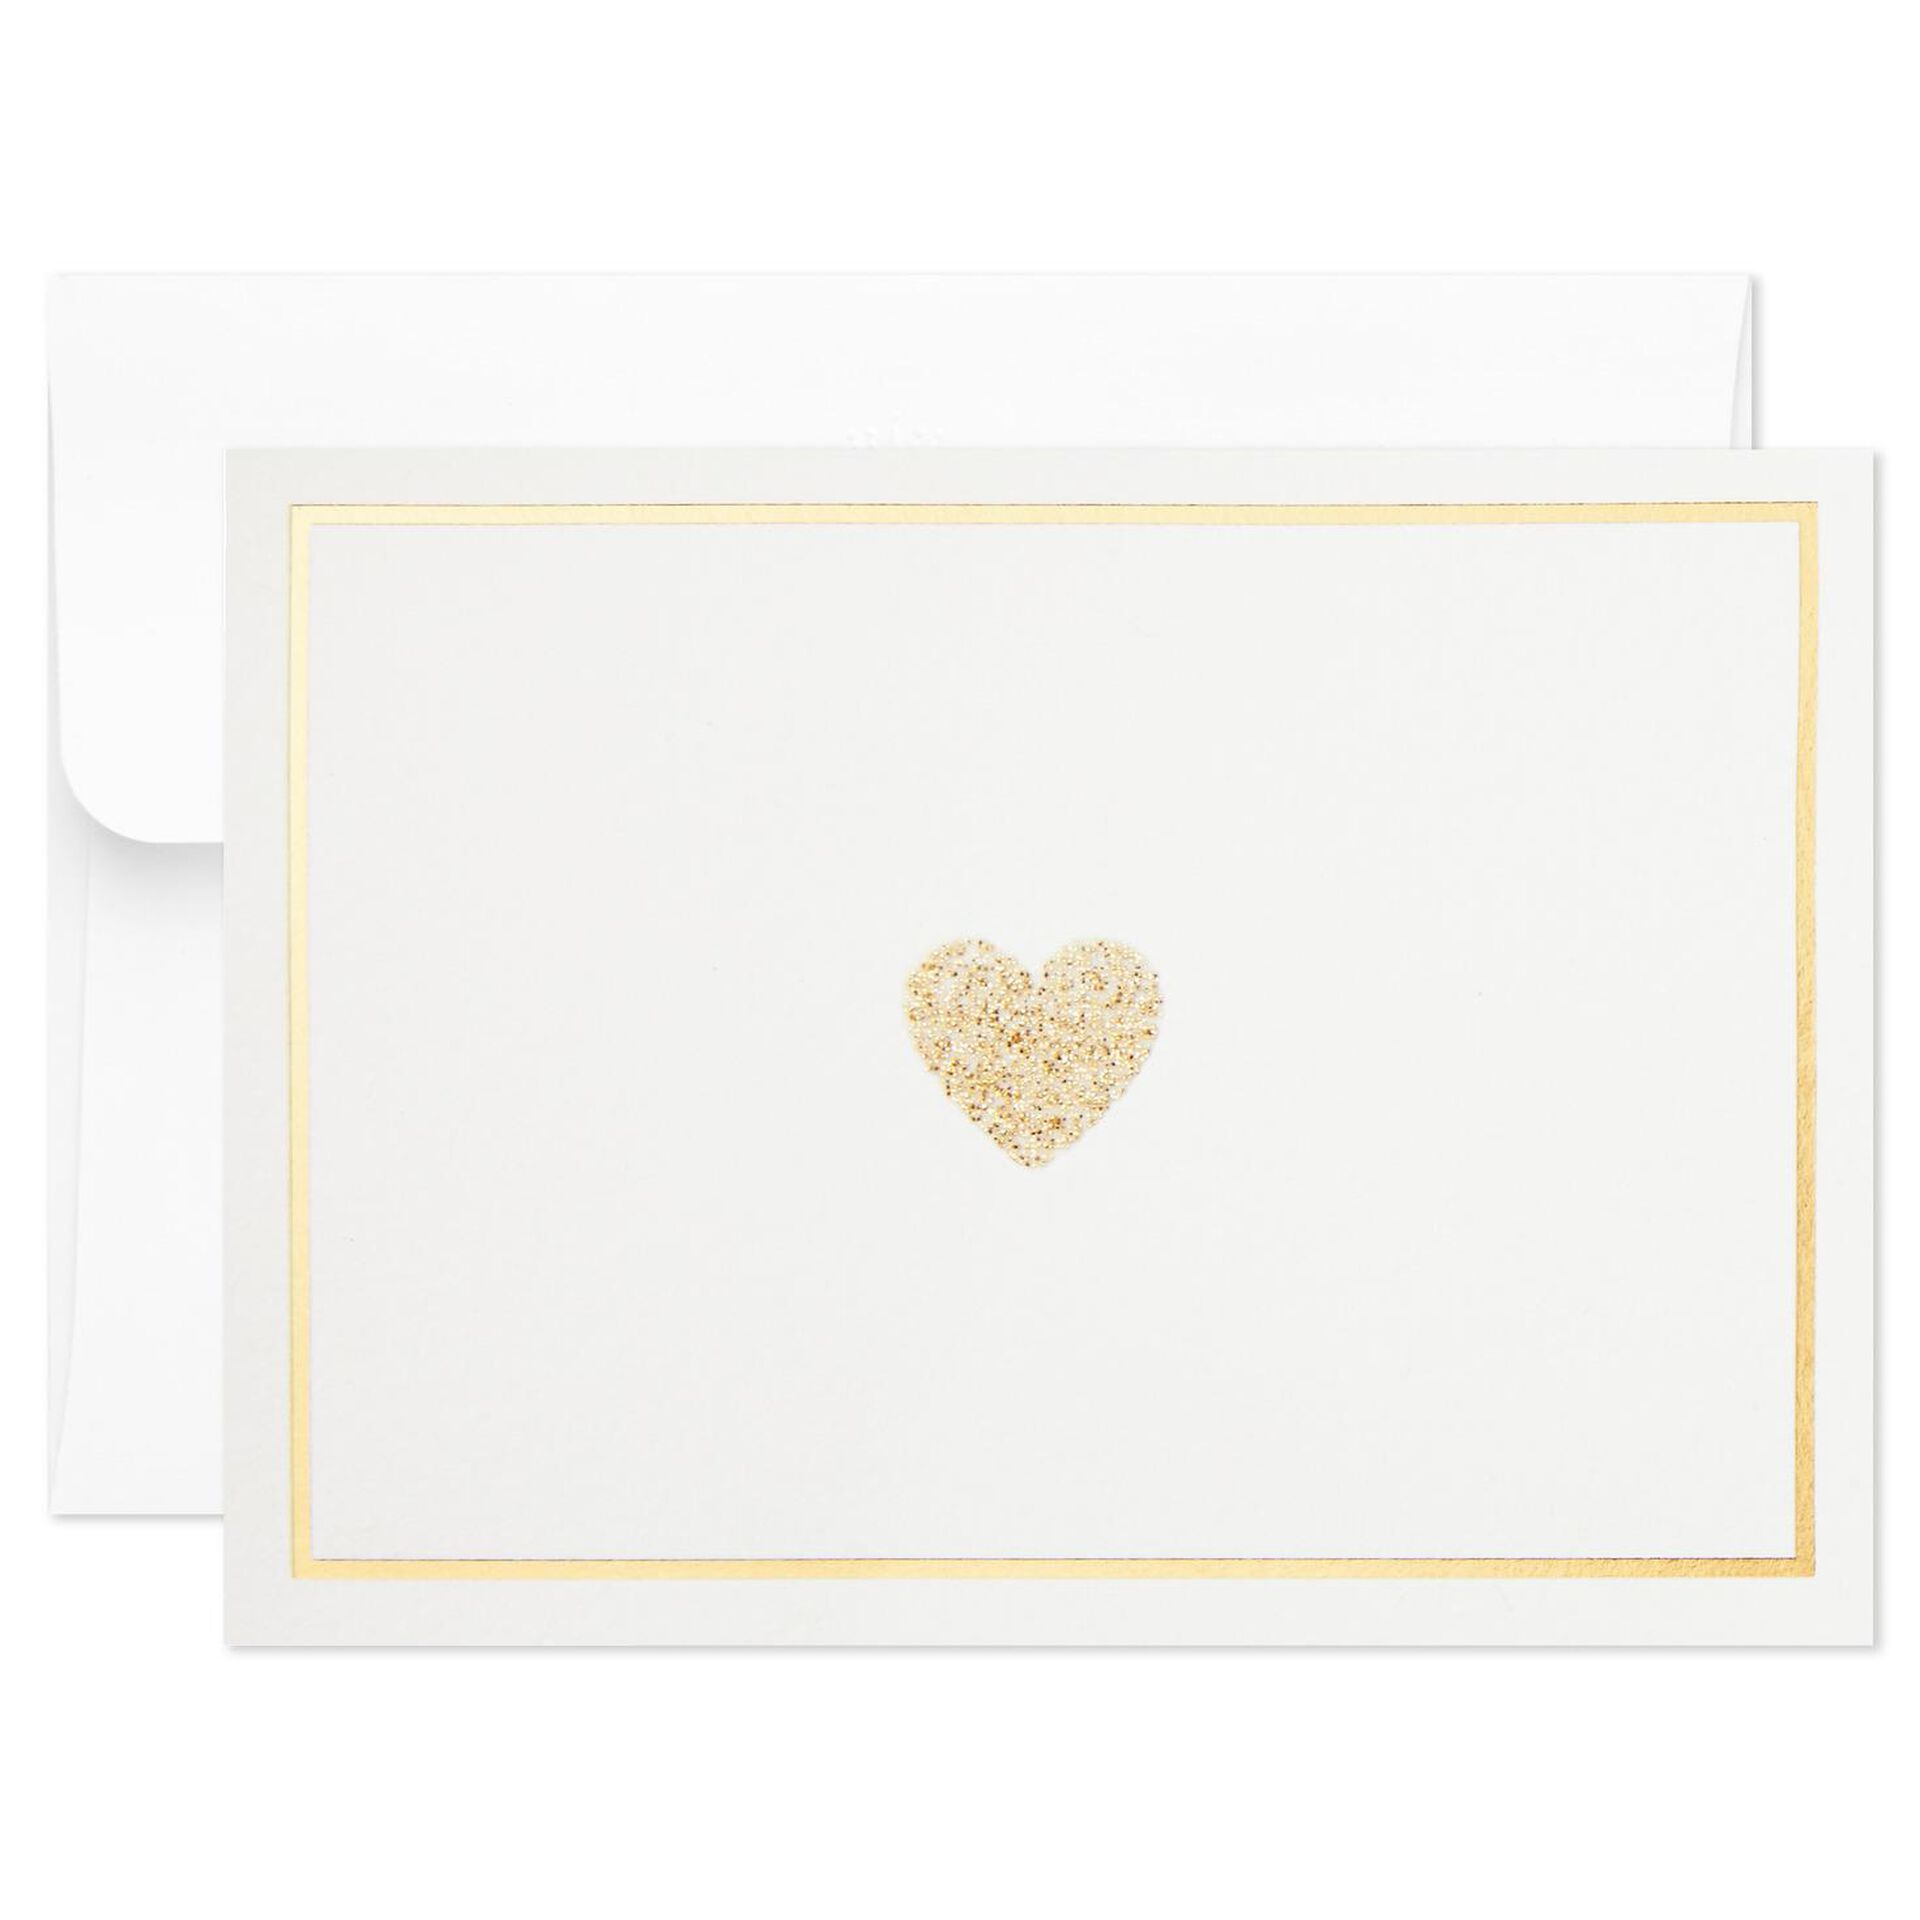 Glittery-Gold-Hearts-Blank-Note-Cards-Box-of-10-root-999NOT1143_NOT1143_02.jpg_Source_Image